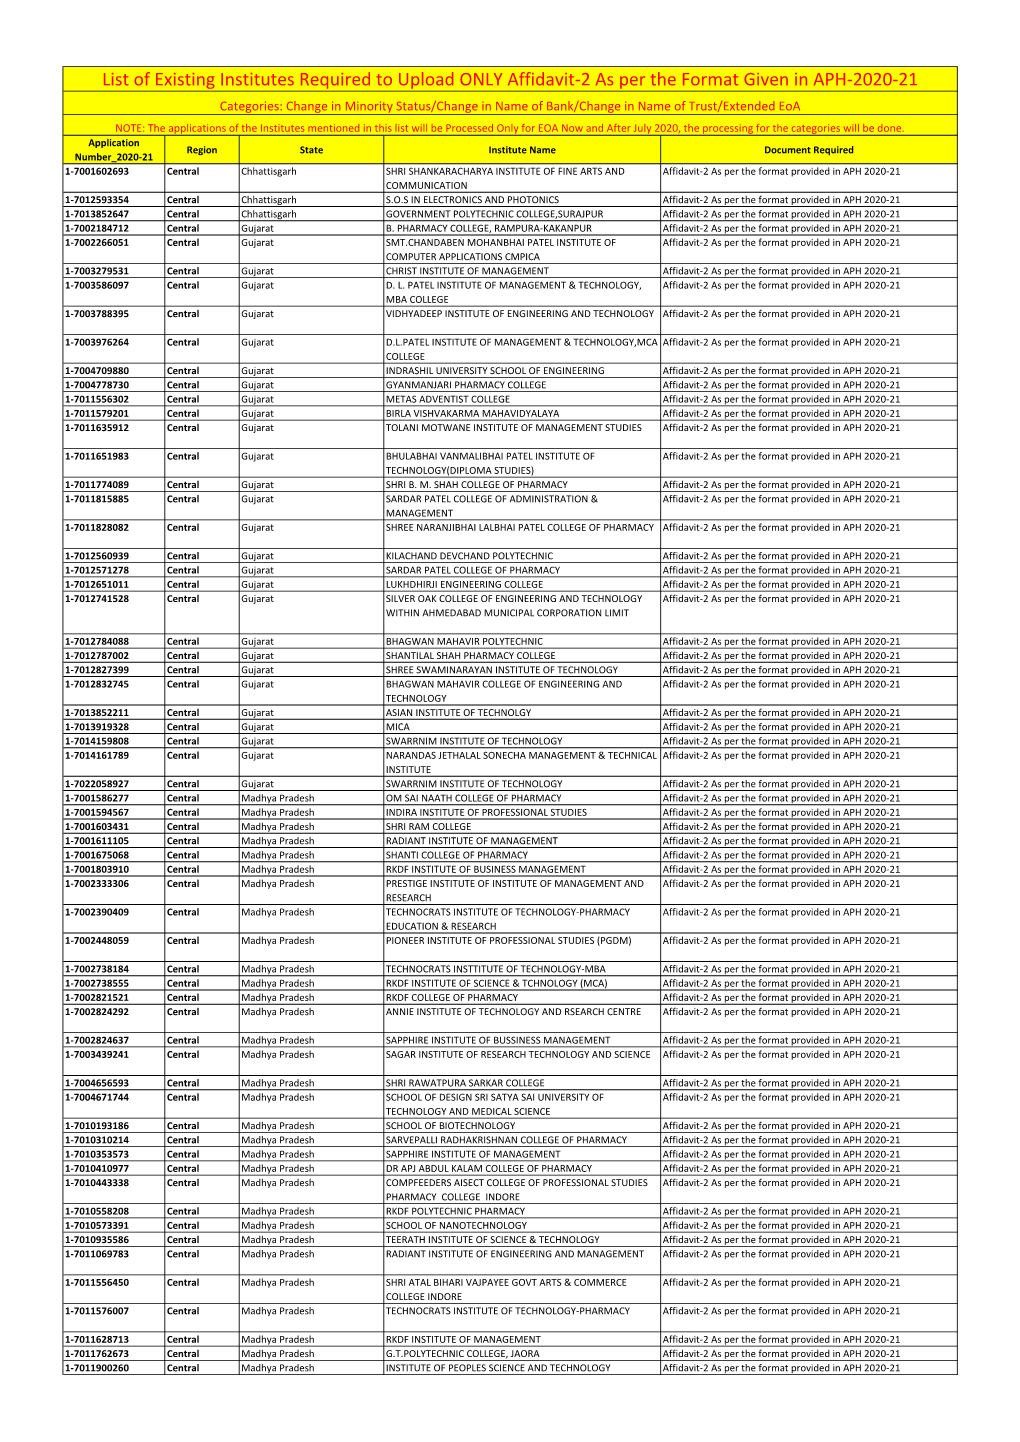 List of Existing Institutes Required to Upload ONLY Affidavit-2 As Per the Format Given in APH-2020-21